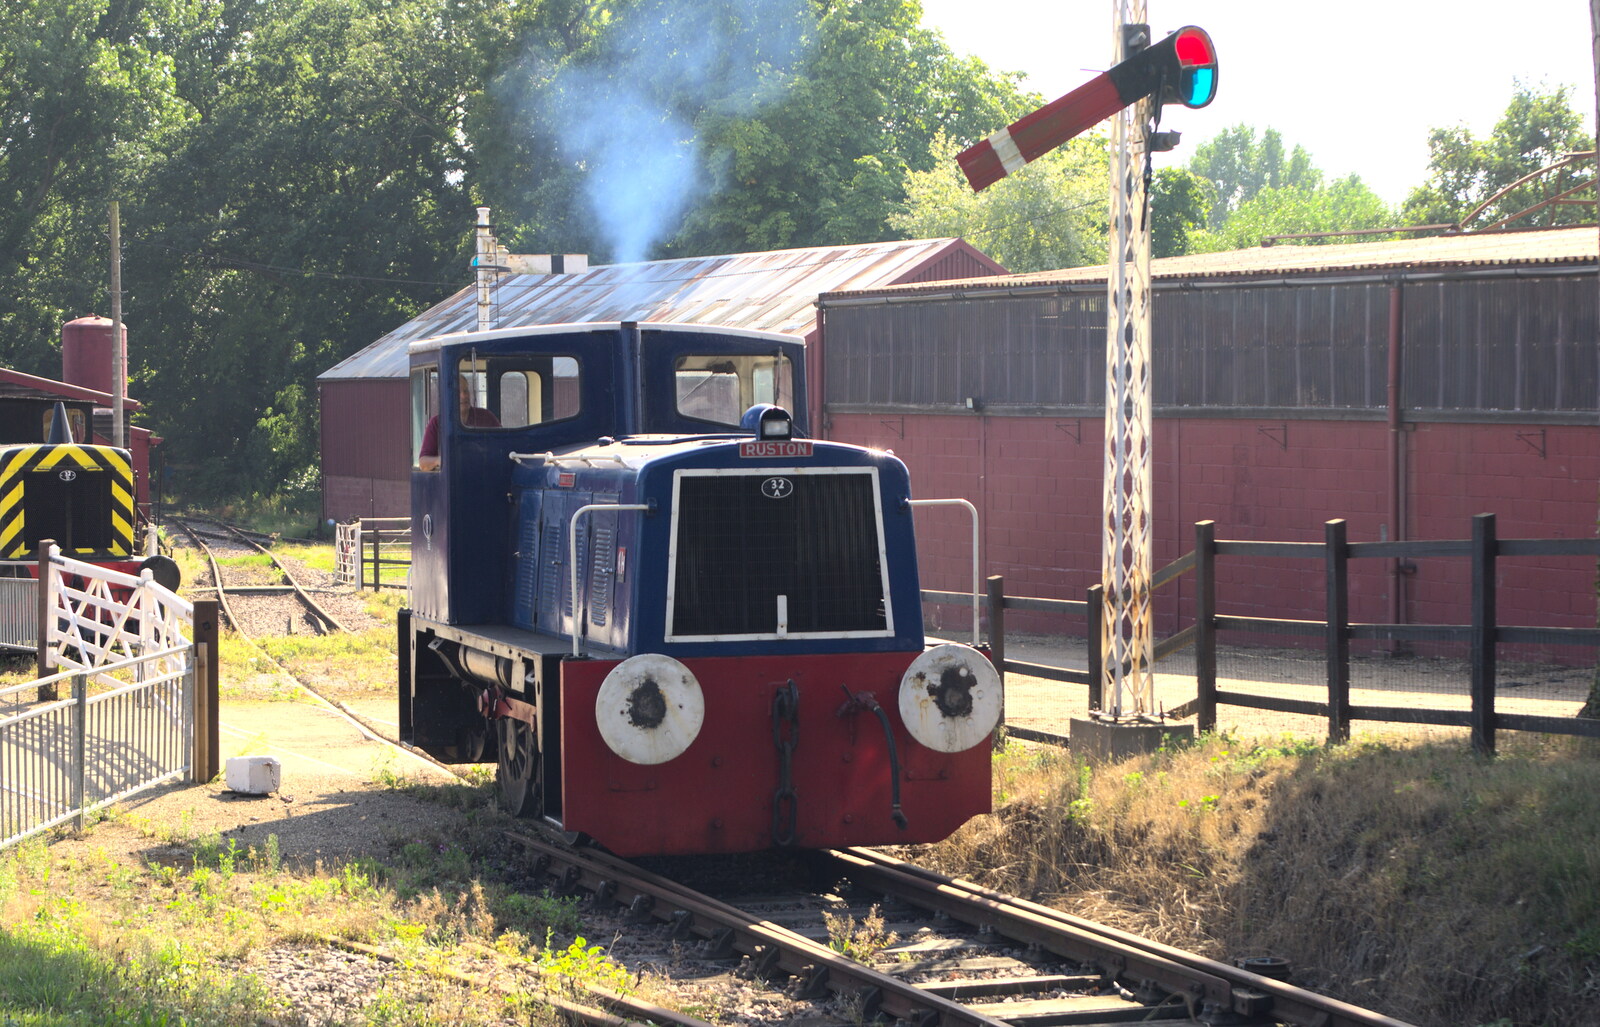 Ruston the shunter trundles over from Bressingham Gardens, and Building Progress, Brome, Suffolk - 26th August 2013